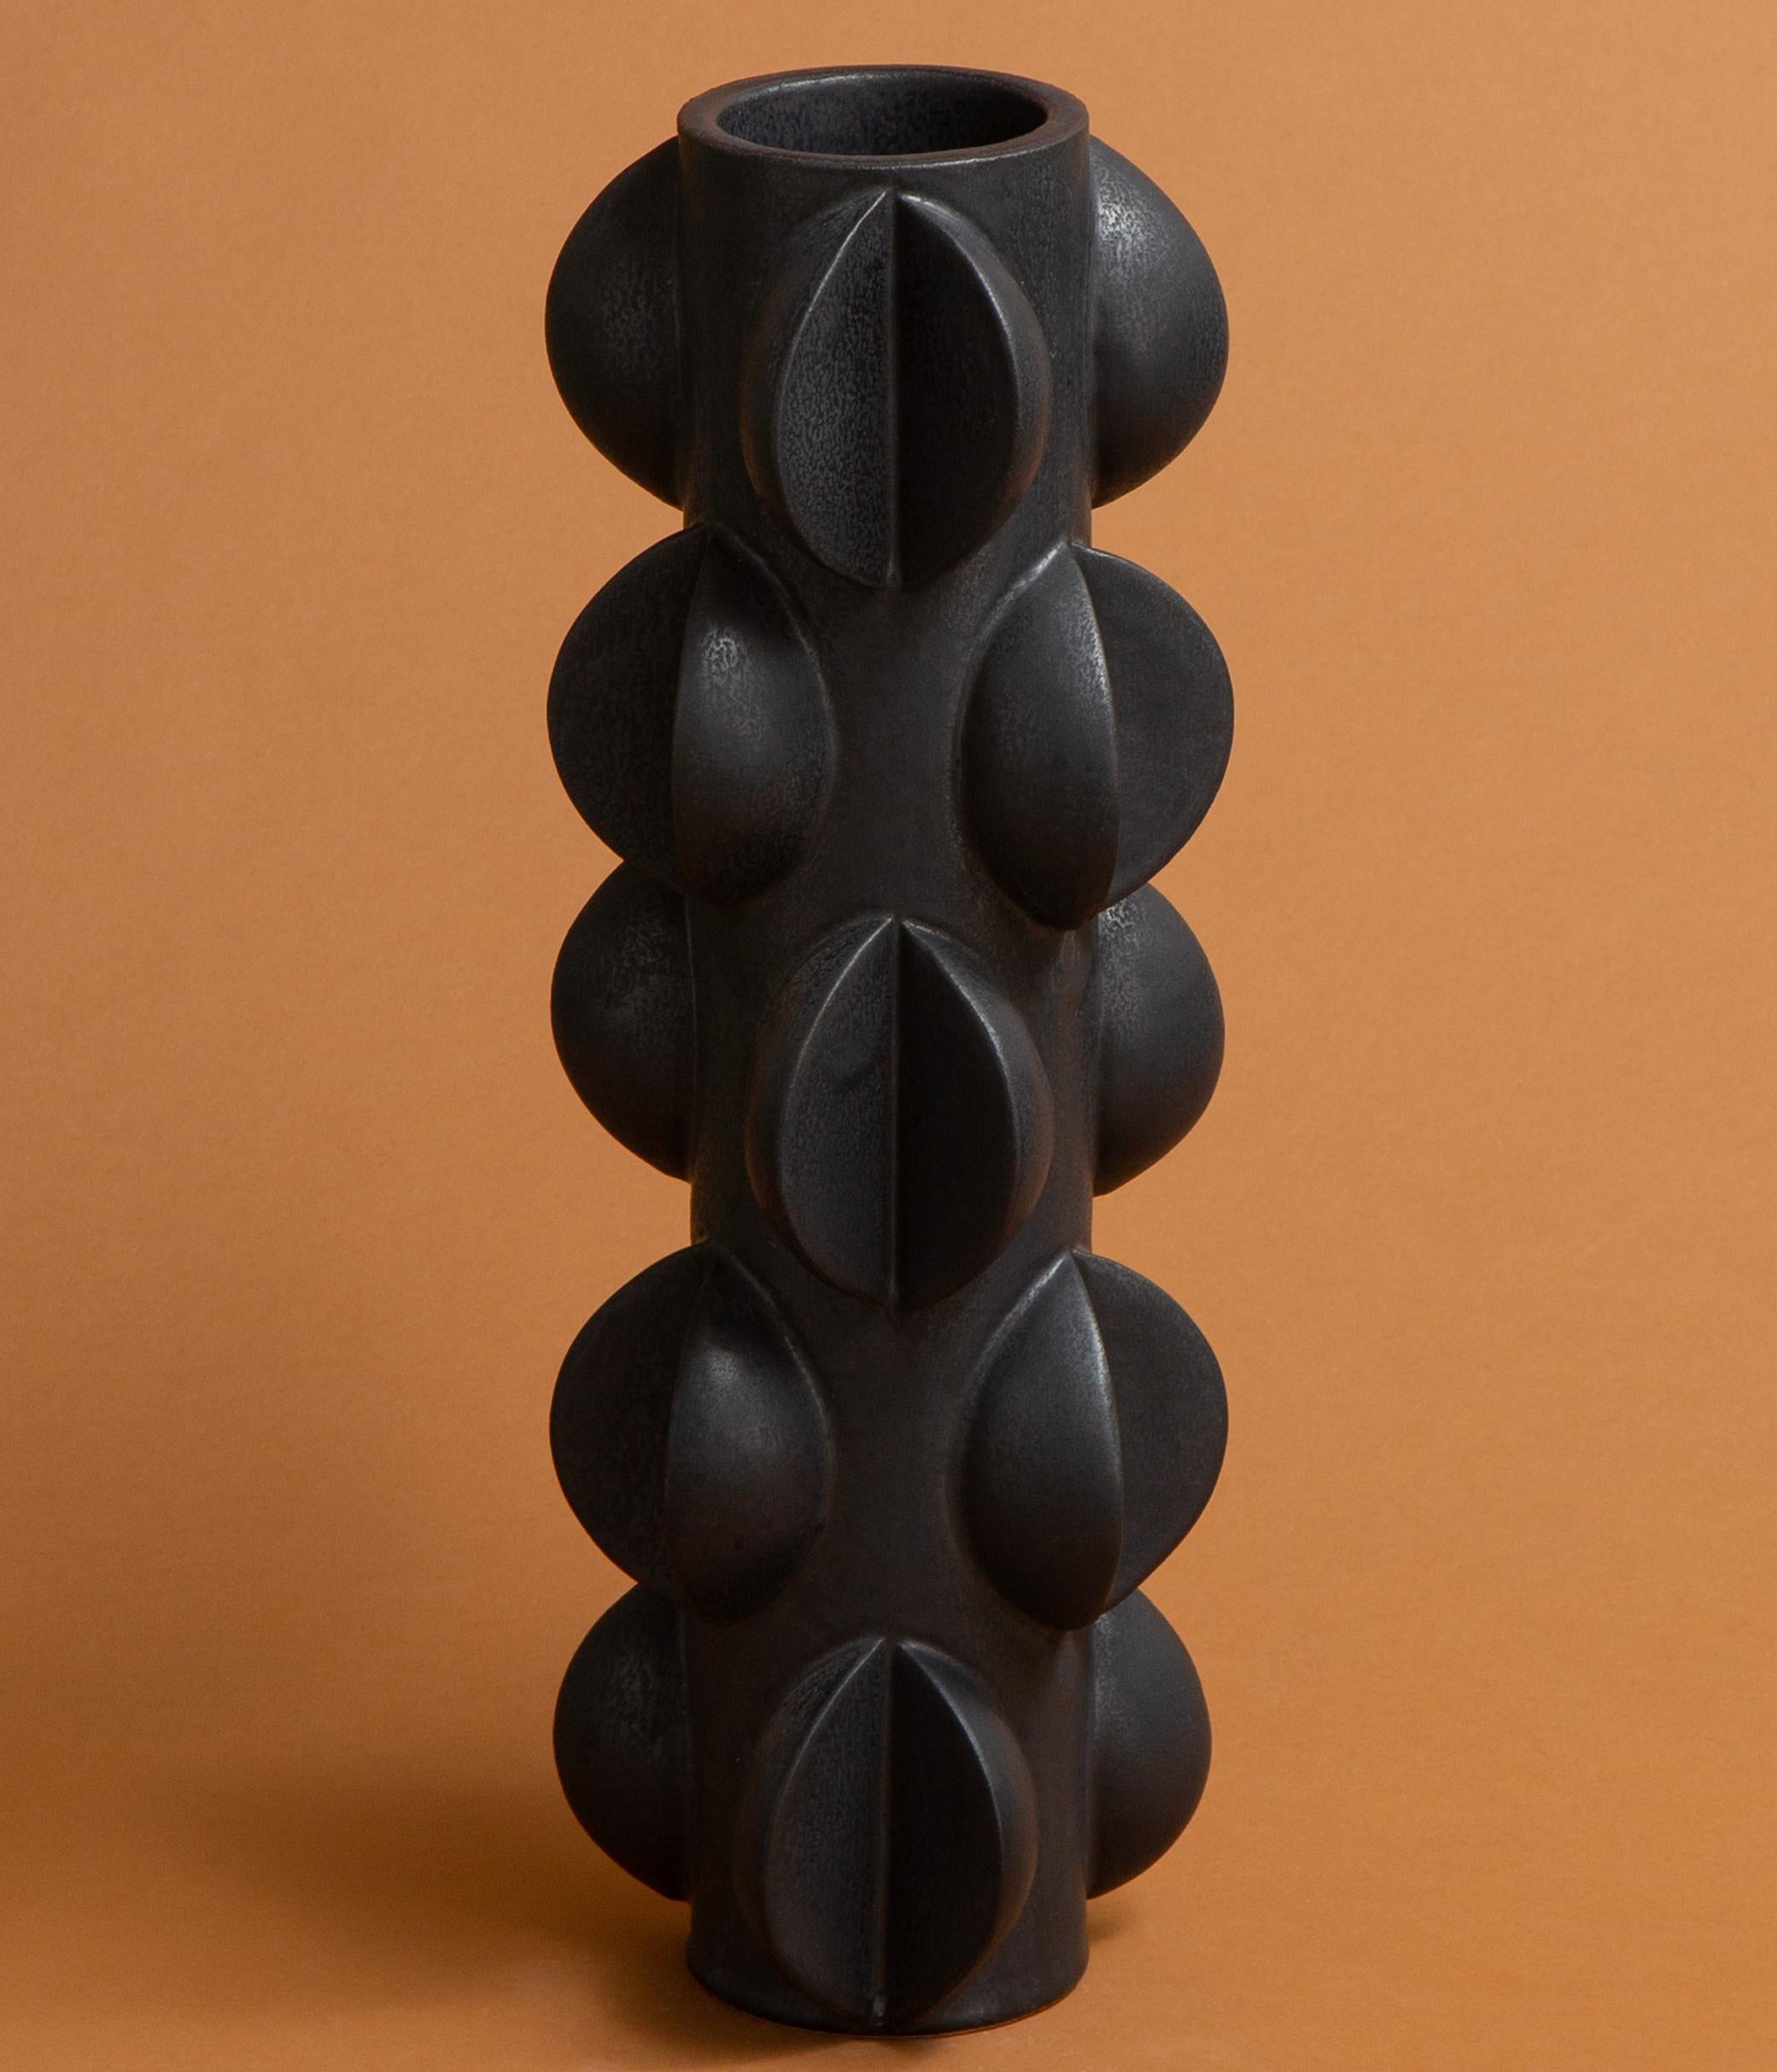 Scandinavian Modern Contemporary, Black Sculptural Vase by Marie Beckman, In Stock For Sale